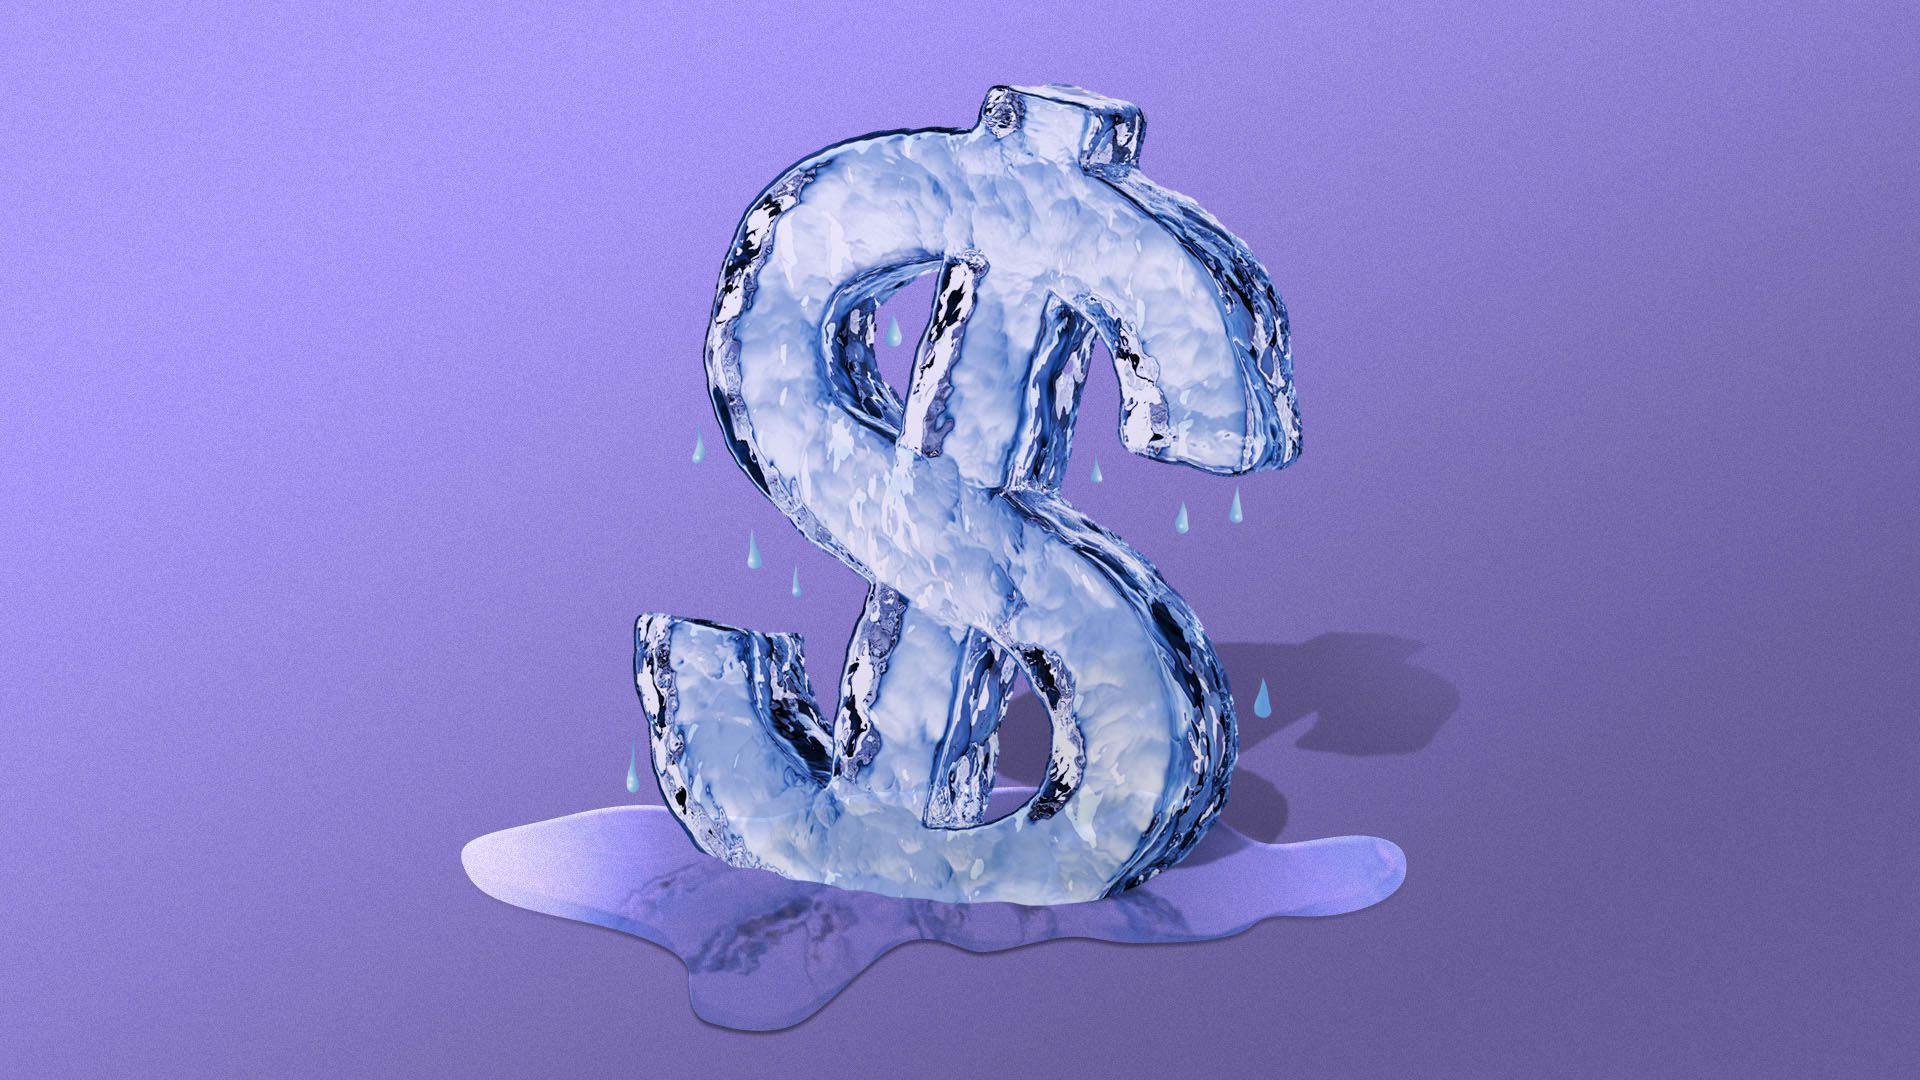 Illustration of a melting dollar sign made out of ice